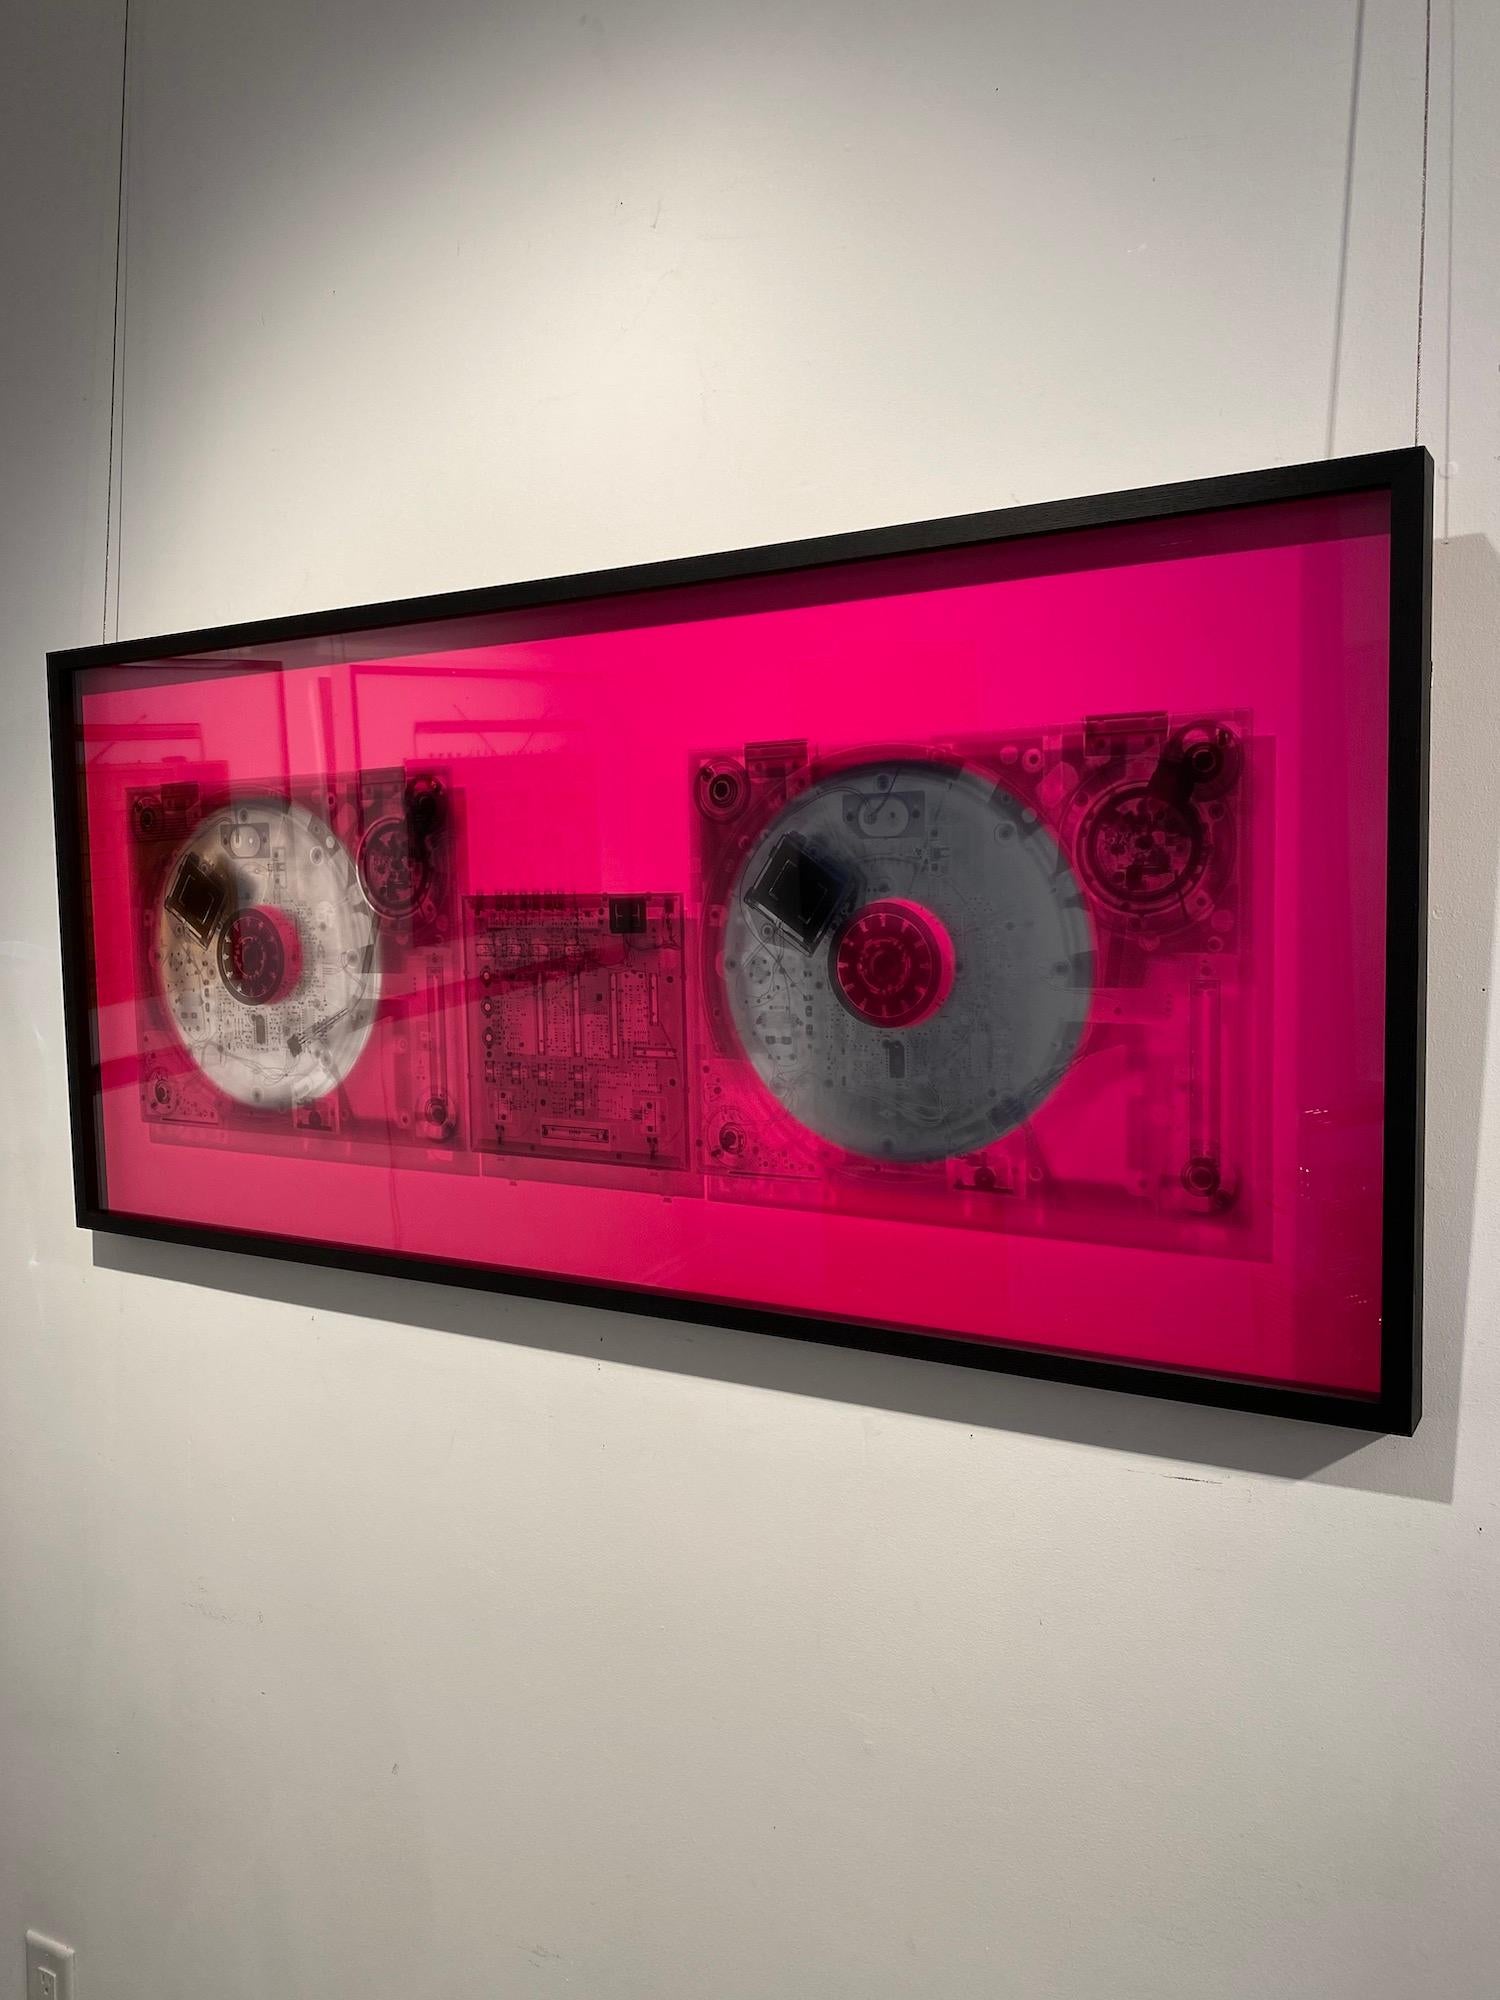 Nick Veasey
Pink Decks
23 x 52 inches, AP Edition
Digital C Print
Framed in black
Signed and numbered by artist

Currently on display at Art Angels

Nick Veasey
X-Ray
Chanel
DJ
Music
Decks
Photography